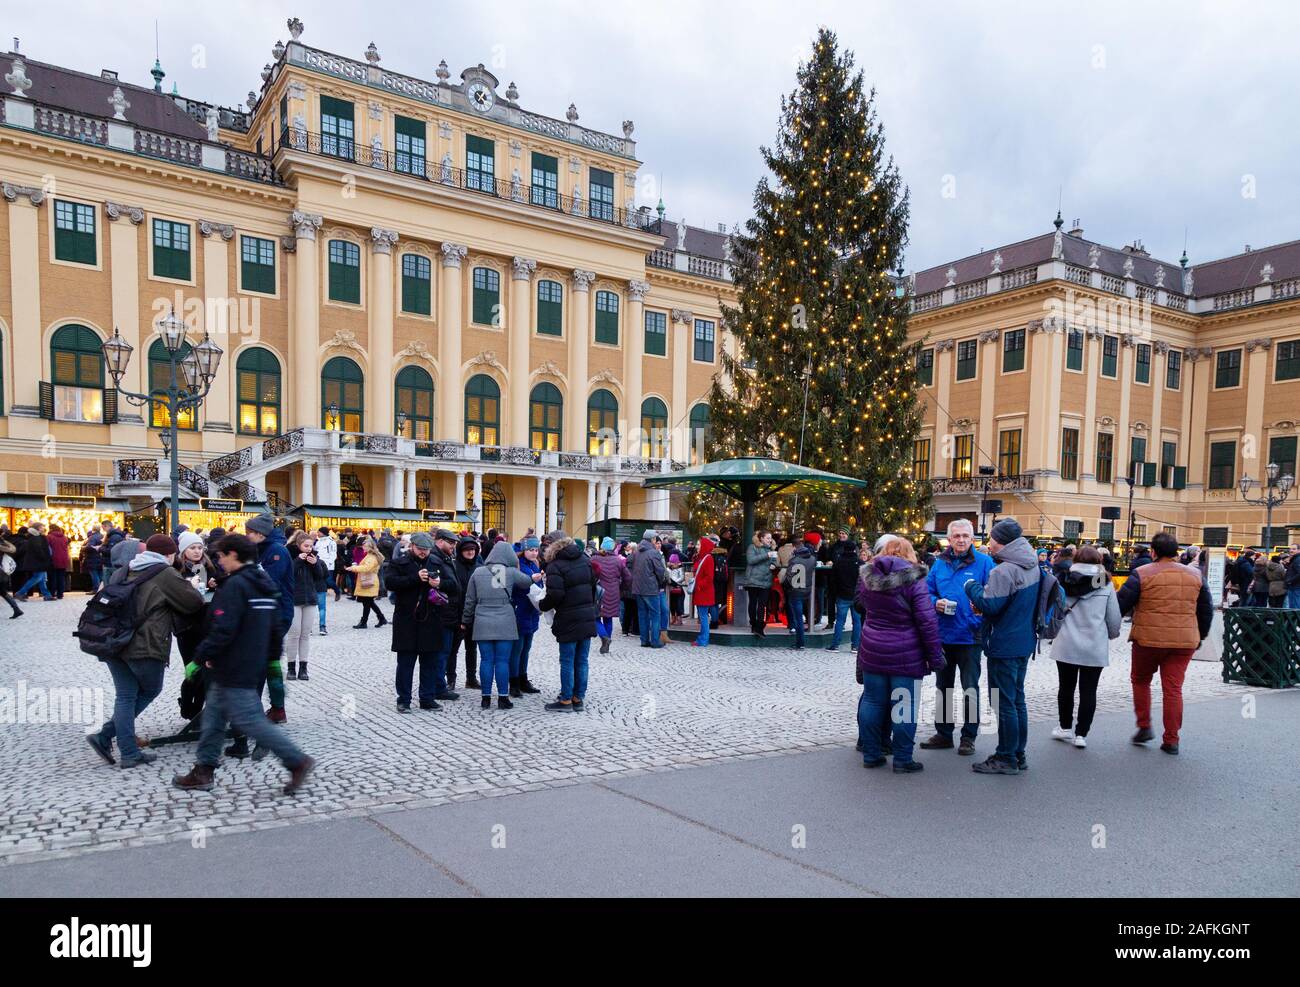 Vienna Christmas markets; people shopping at the stalls; outside the historic Schonbrunn Palace, Vienna Austria Europe Stock Photo